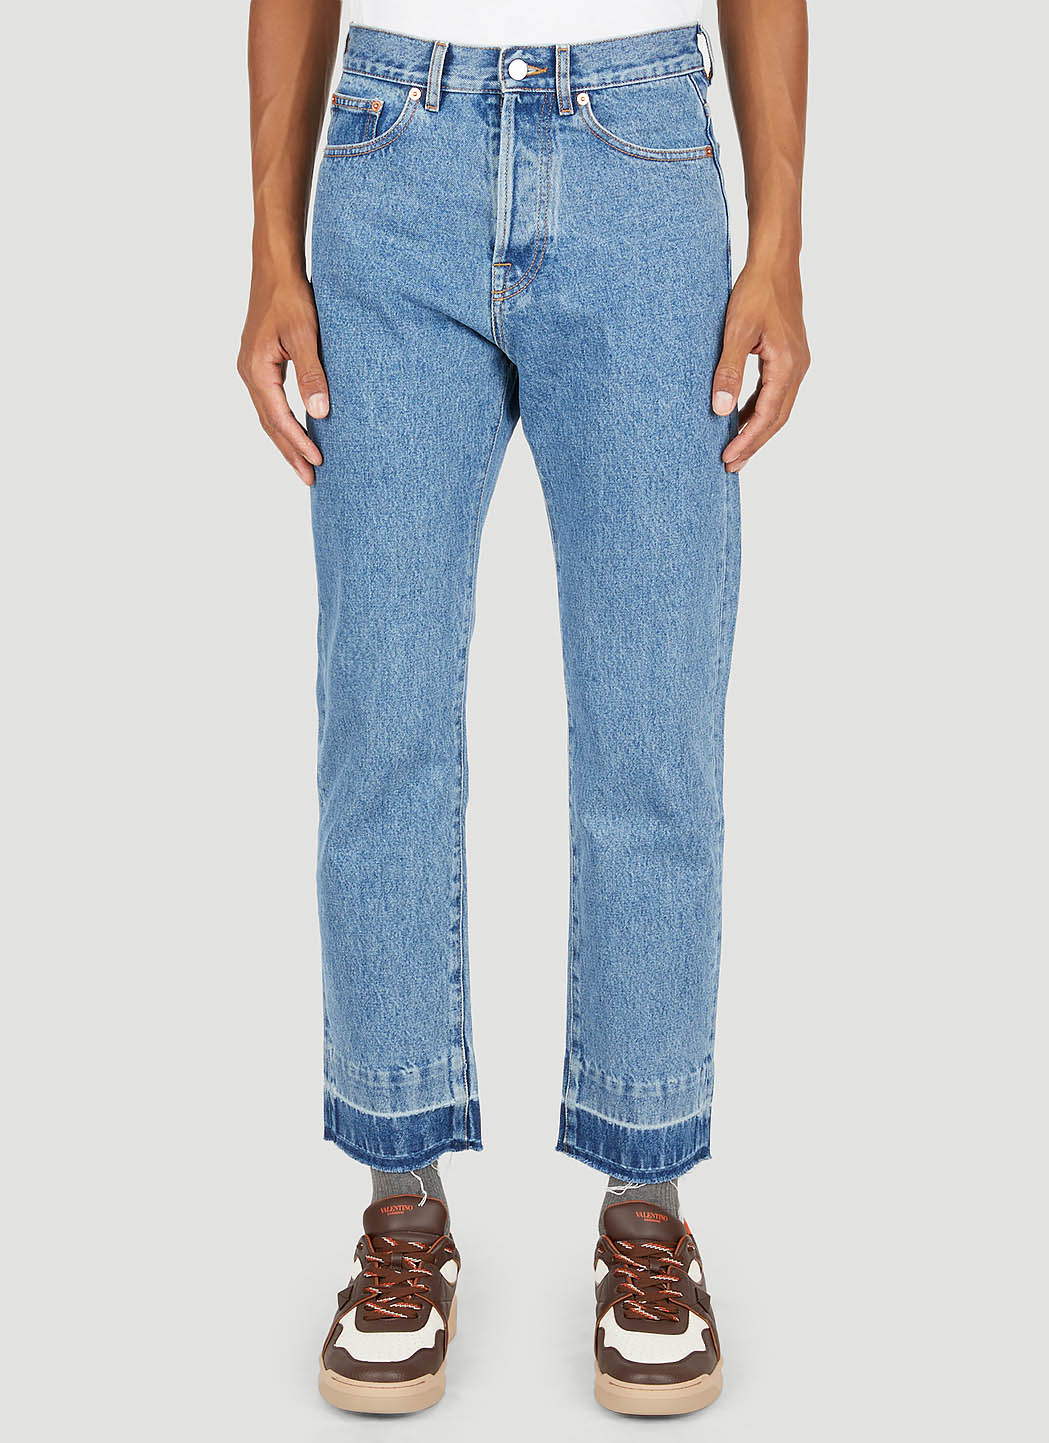 Tapered Vintage Style Jeans